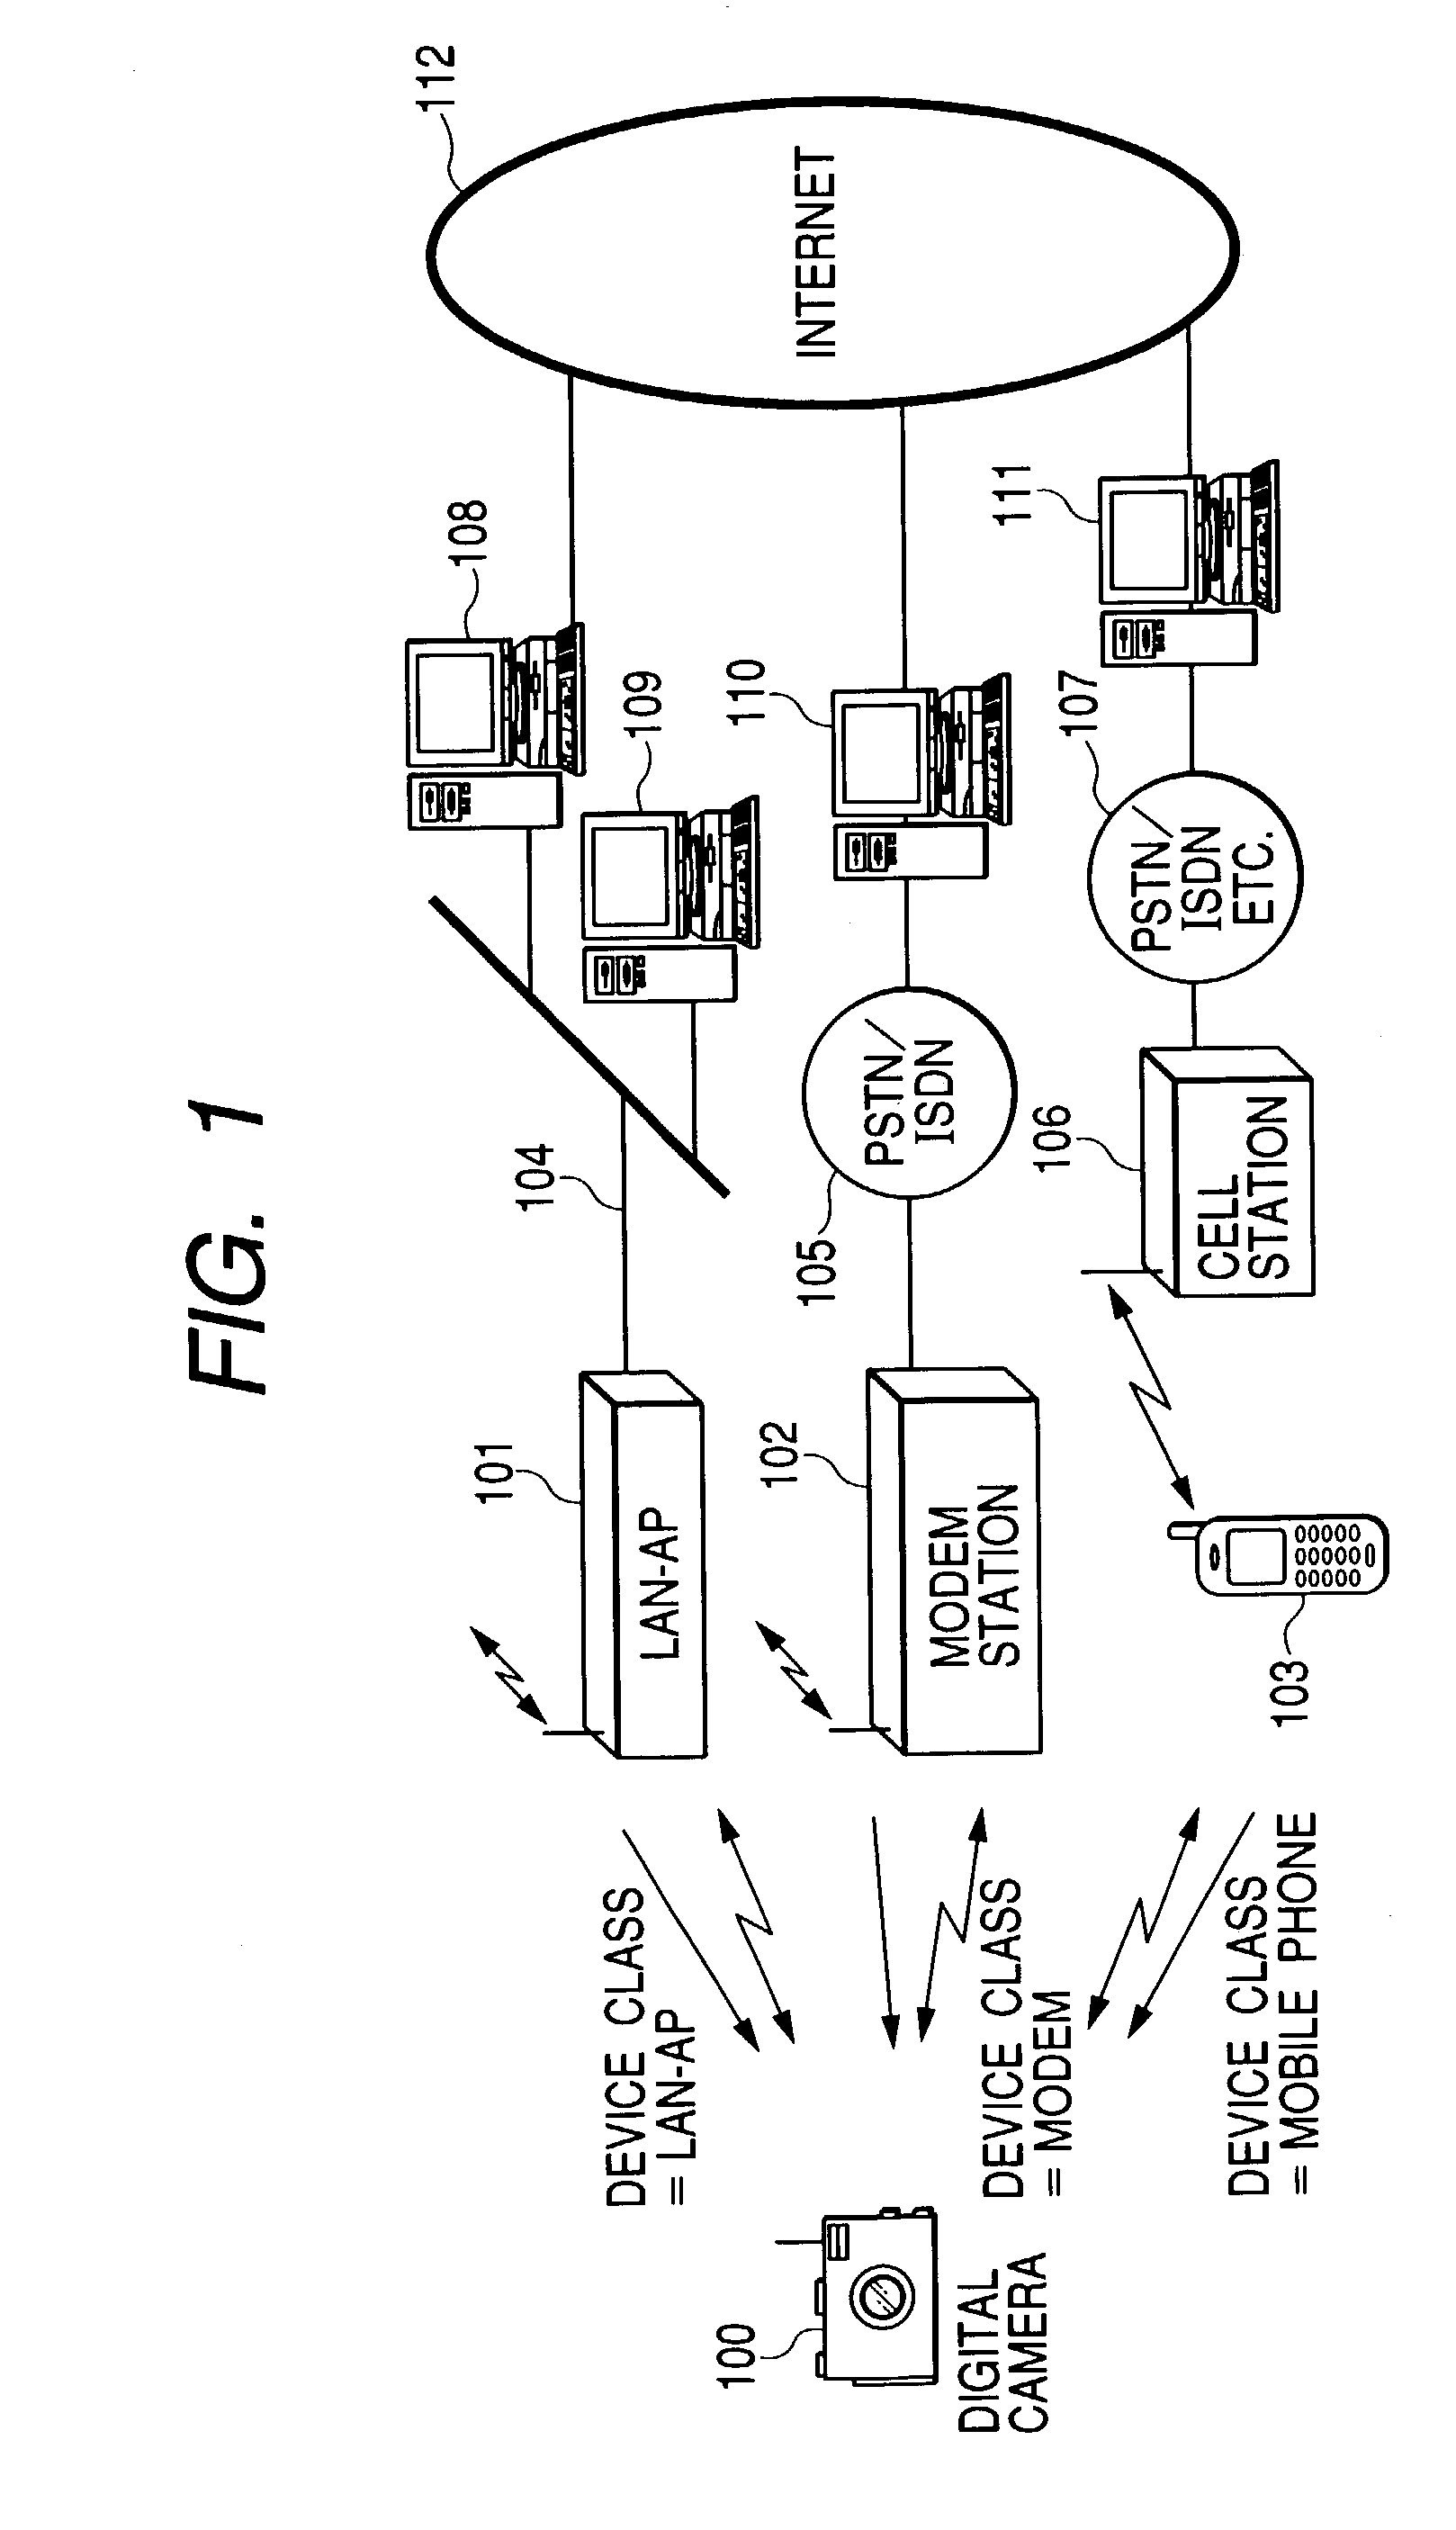 Method for performing a wireless communication by a wireless communication apparatus with an access point and establishing a connection with a network through the access point